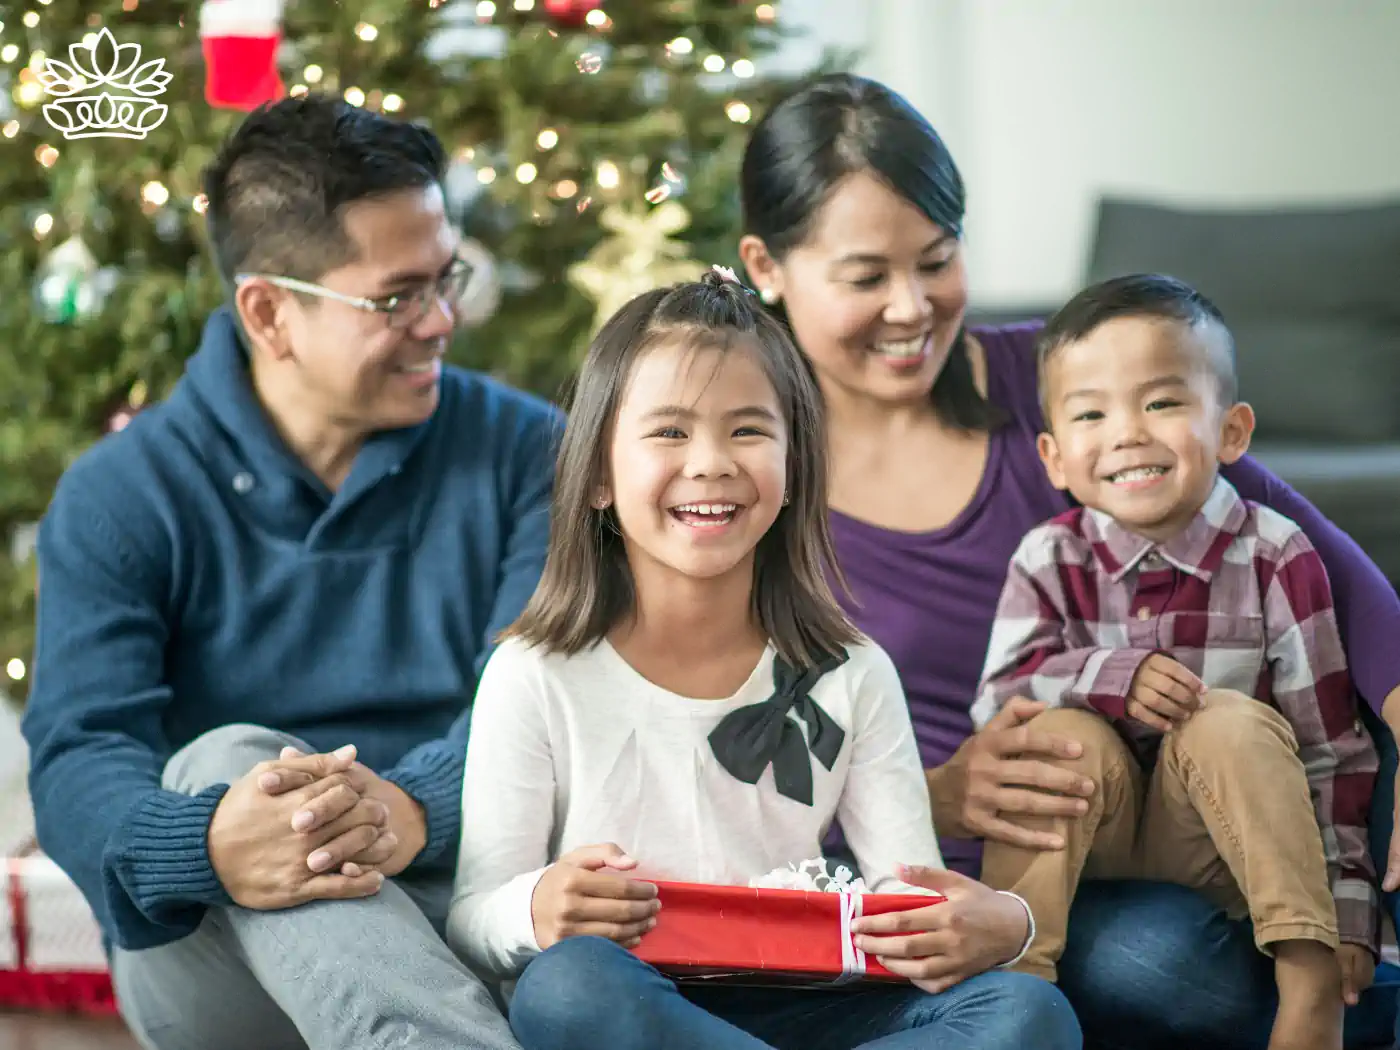 A happy family exchanging gifts by the Christmas tree, illustrating festive joy provided by Nationwide Gift Delivery. Fabulous Flowers and Gifts - Nationwide Gift Delivery